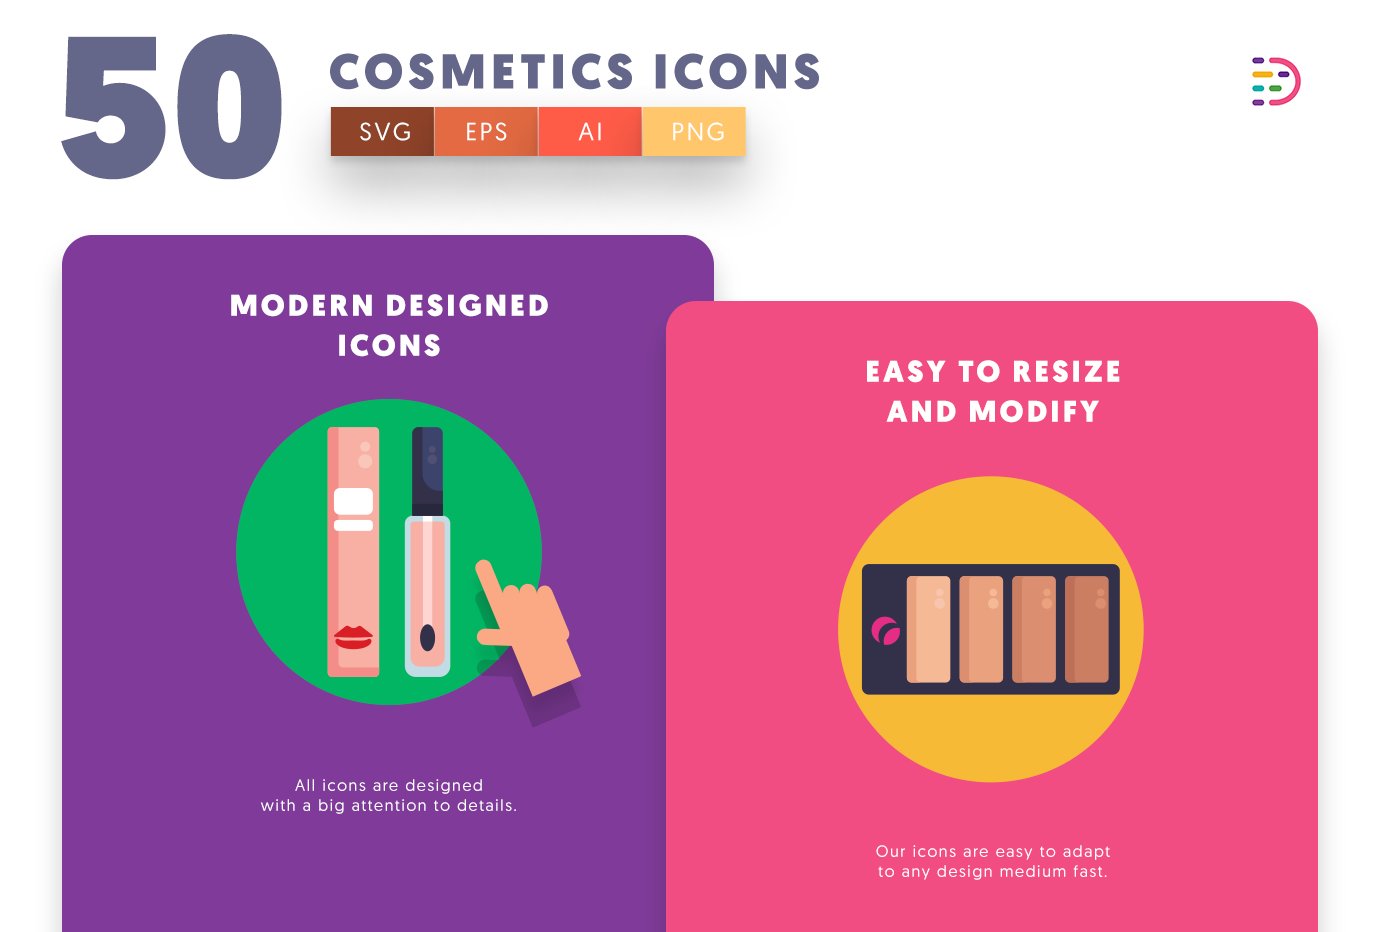 cosmetics icons cover copy 5 701